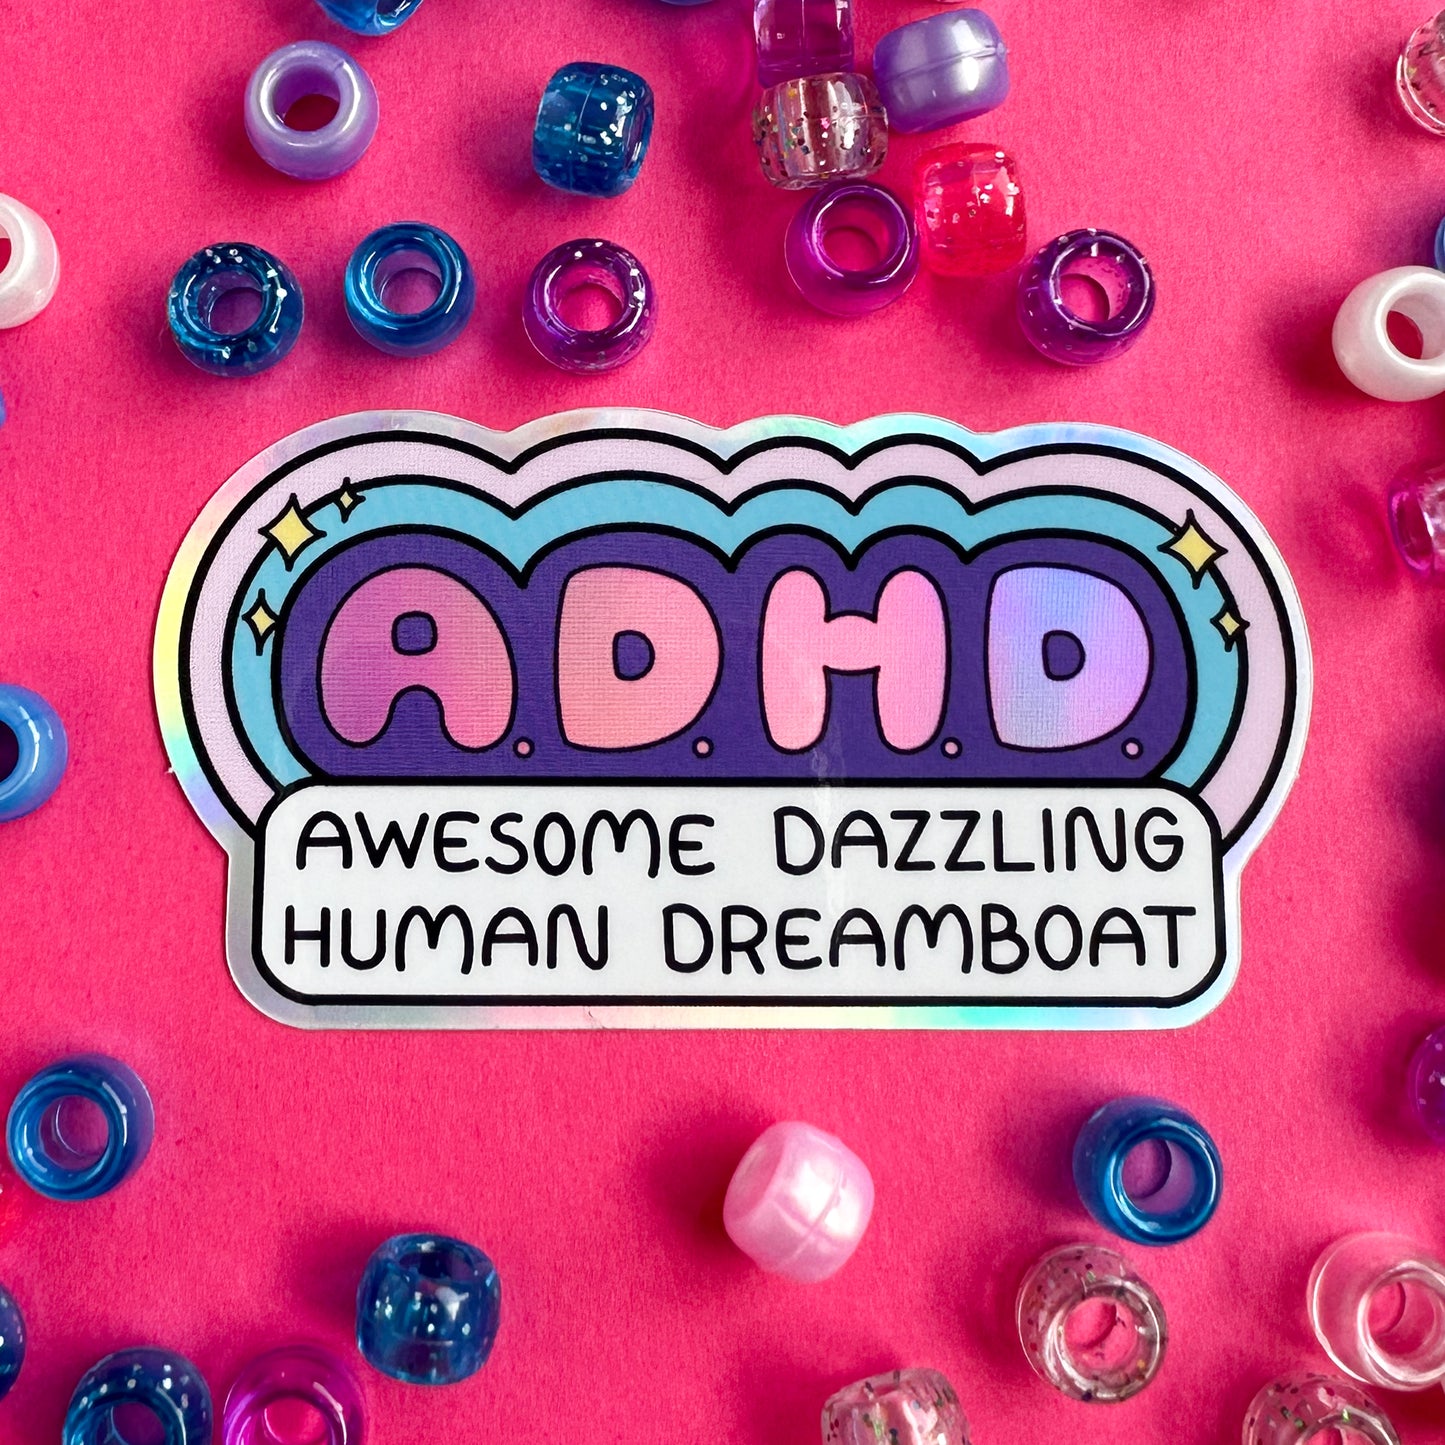 A holographic sticker that reads "A.D.H.D. Awesome Dazzling Human Dreamboat" surrounded by purple, blue, and pink bubble letters on a hot pink background surrounded by glittery pony beads.